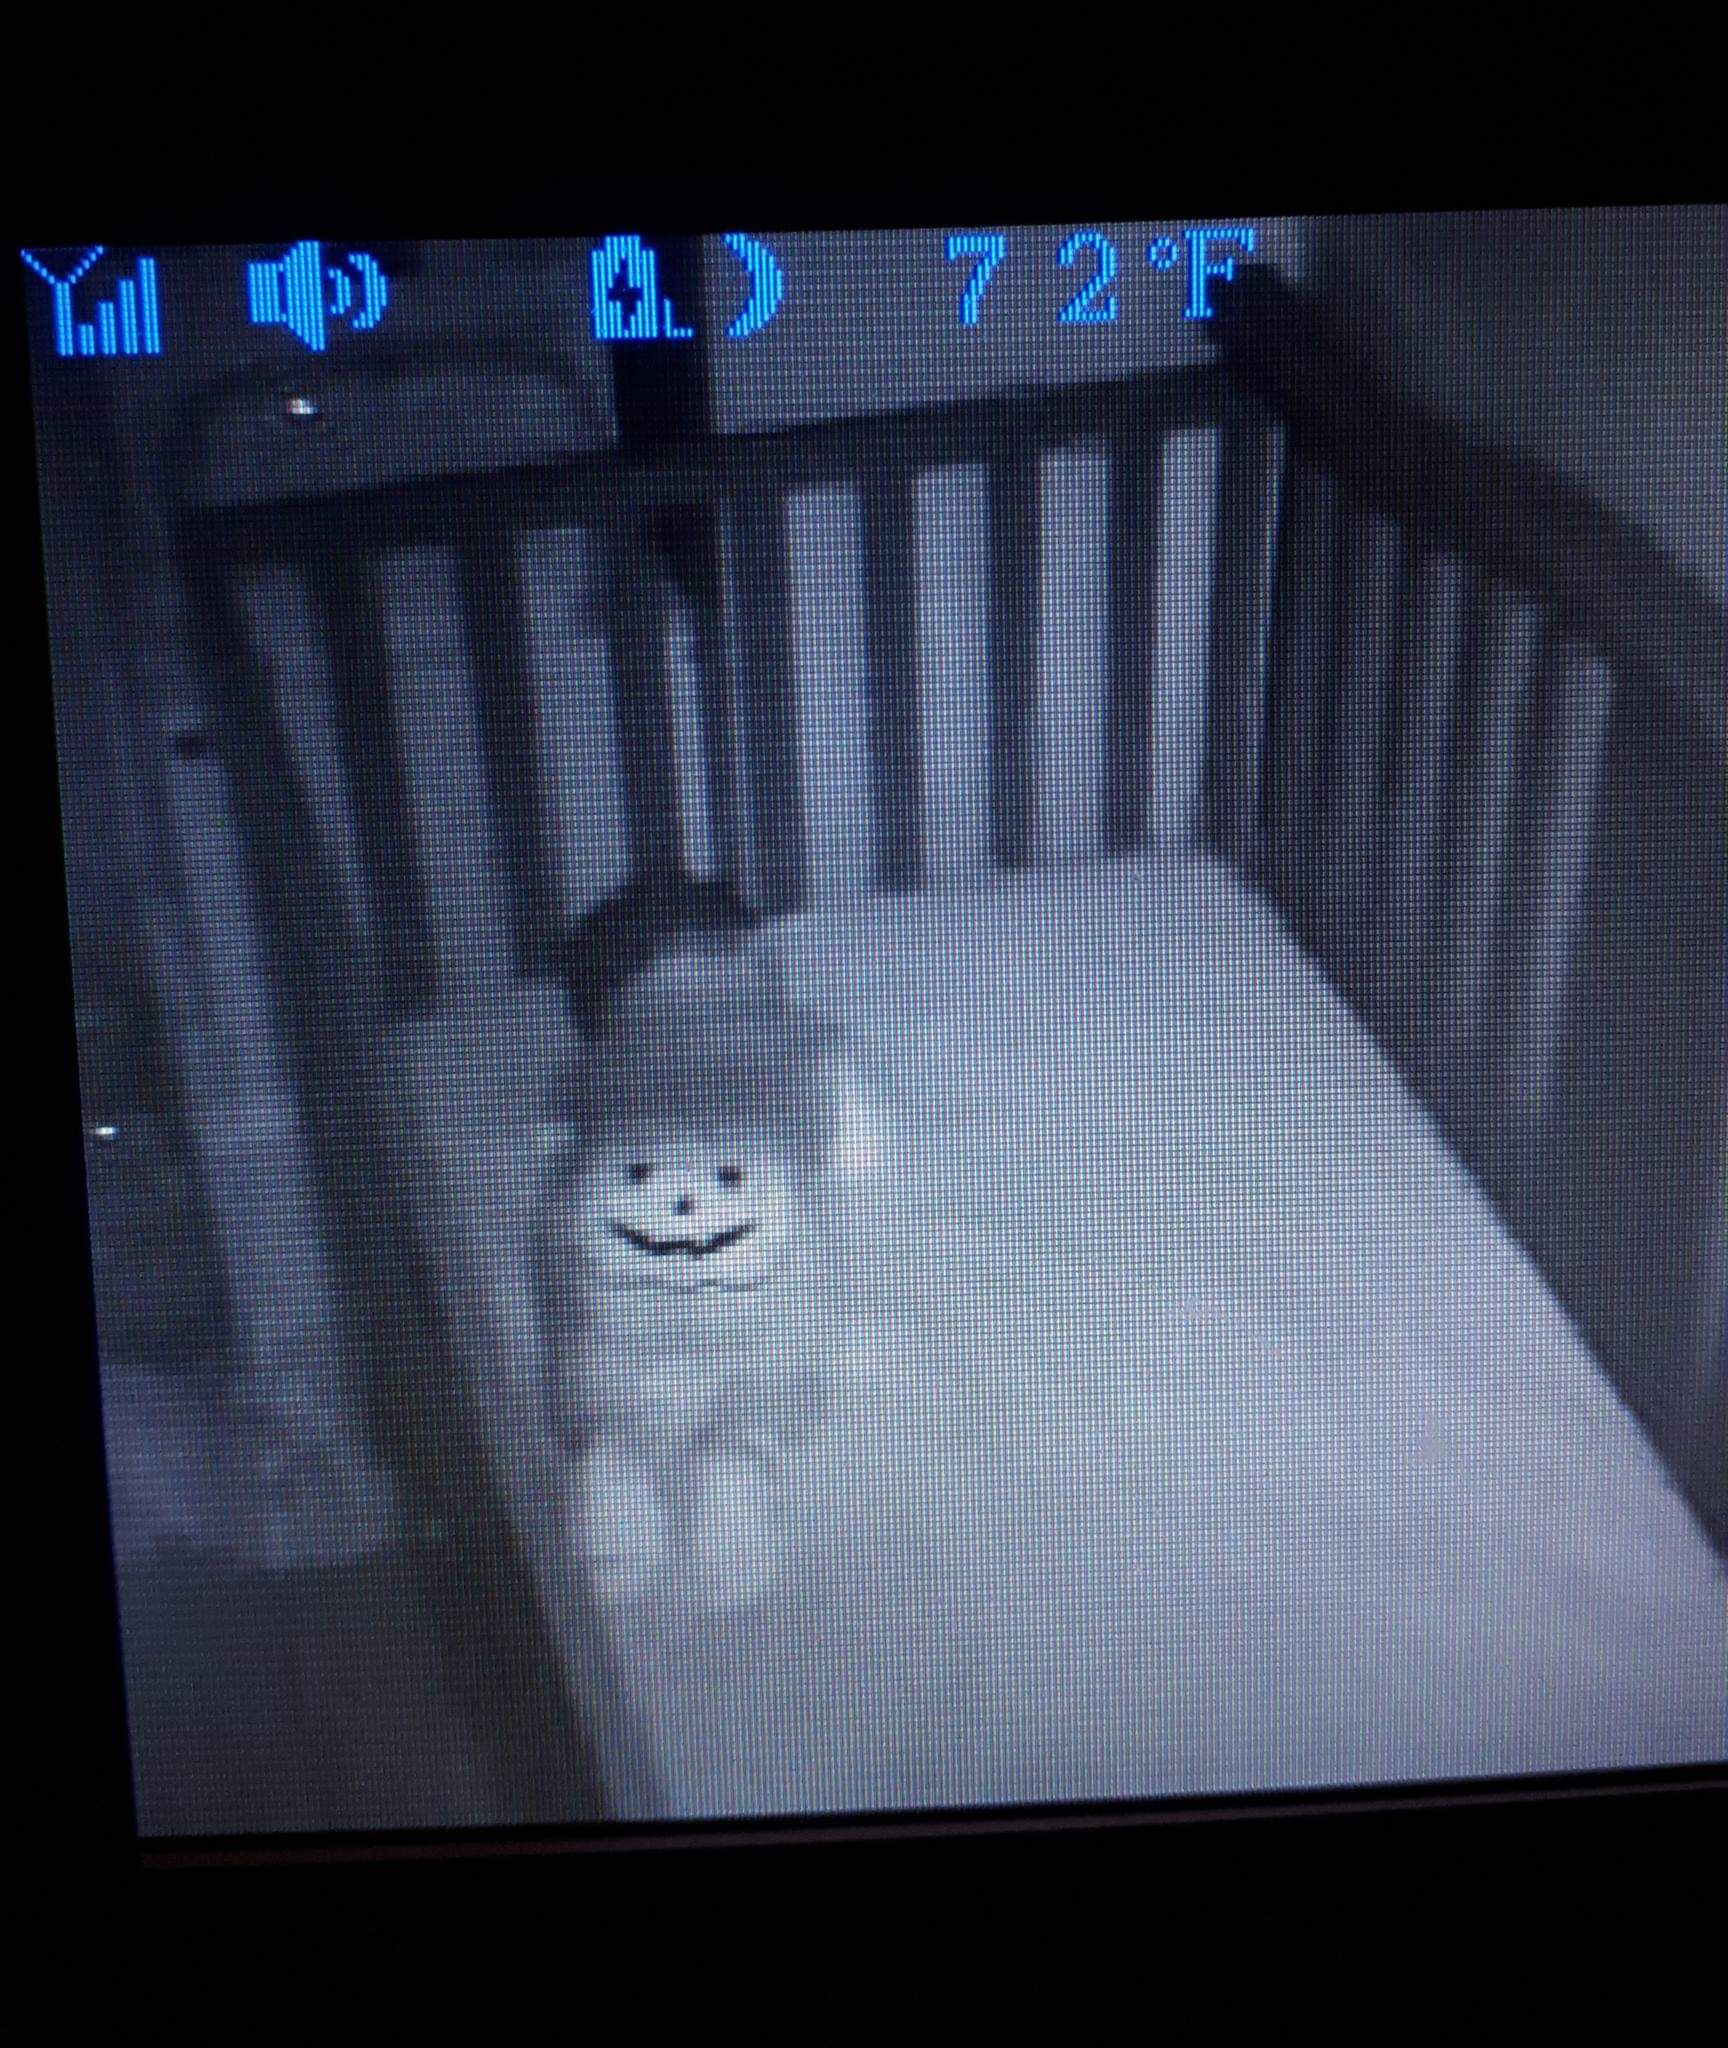 I put my son in a Halloween onesie without thinking much about it and gave myself a heart attack at 2am.